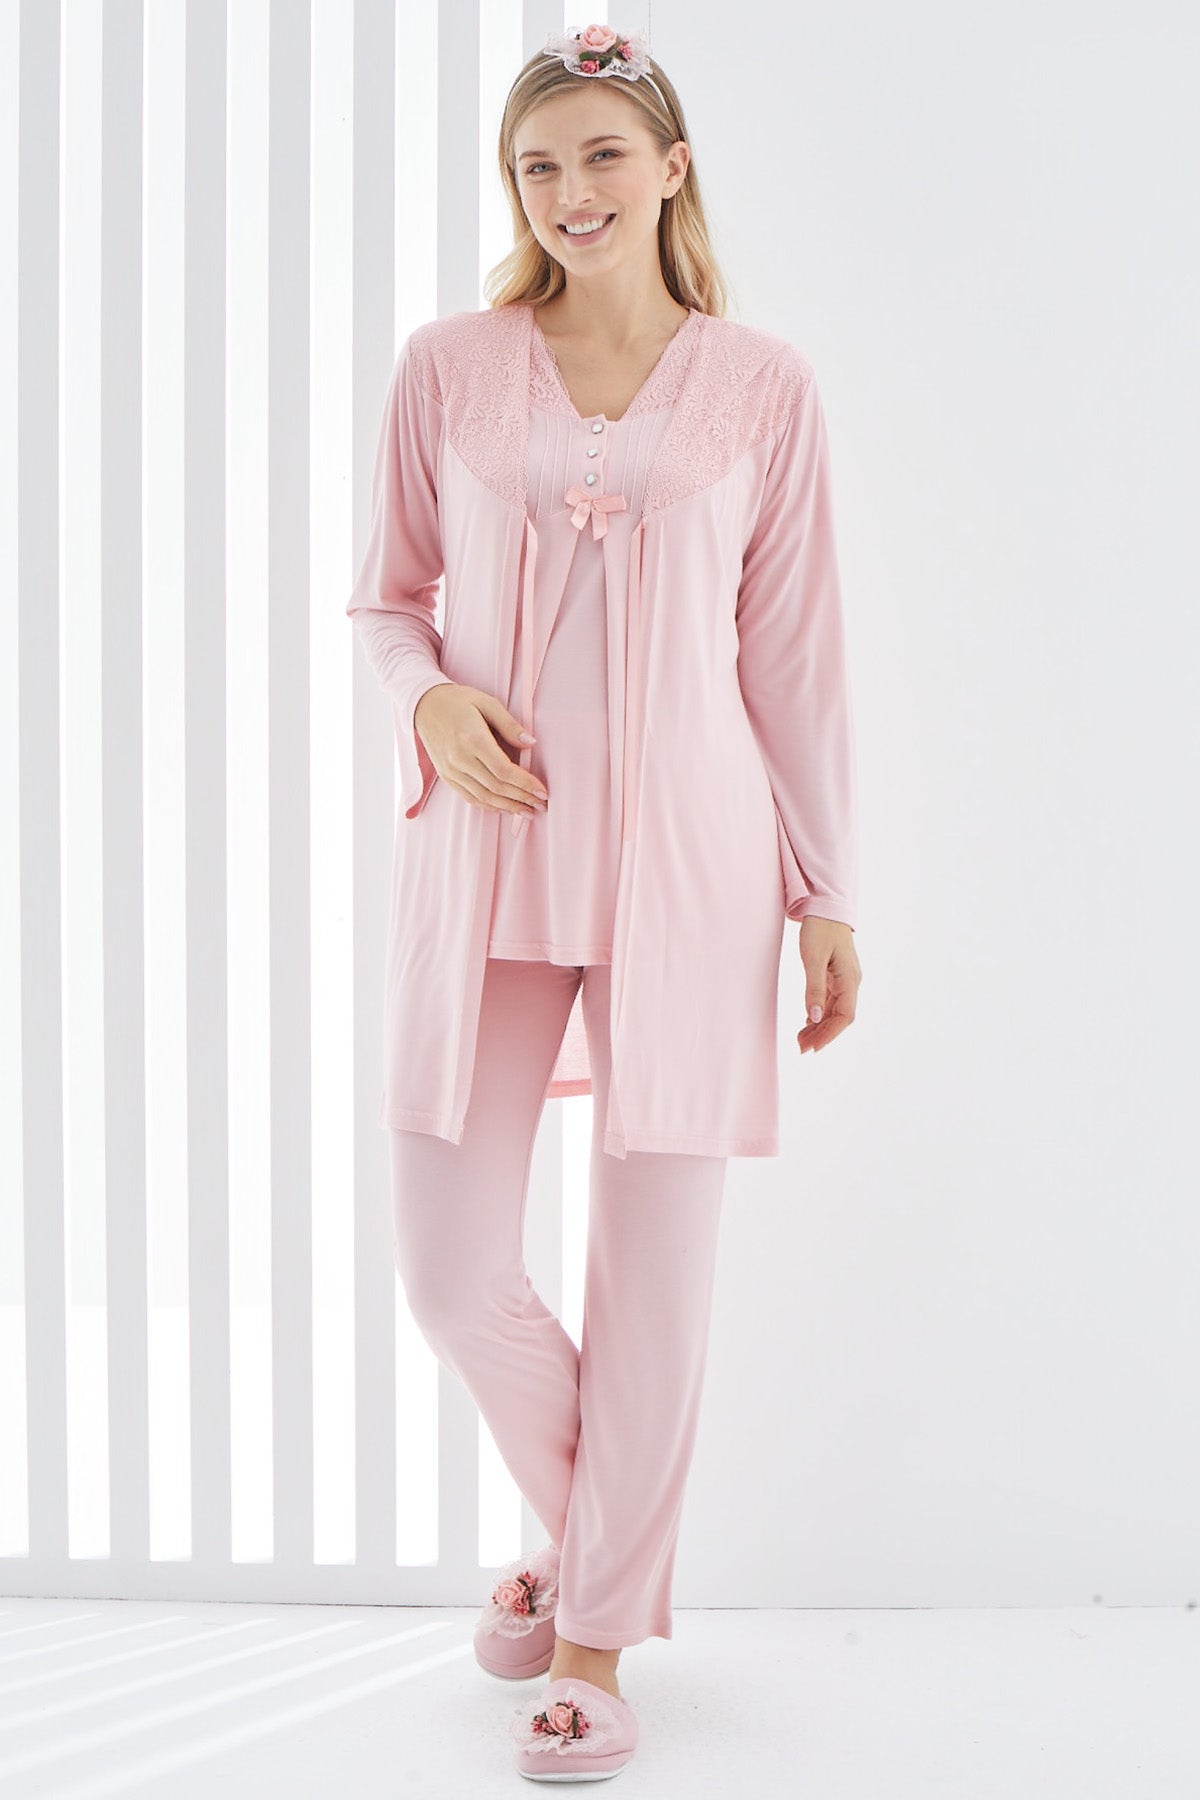 Shopymommy 3402 Lace 3-Pieces Maternity & Nursing Pajamas With Guipure Robe Powder